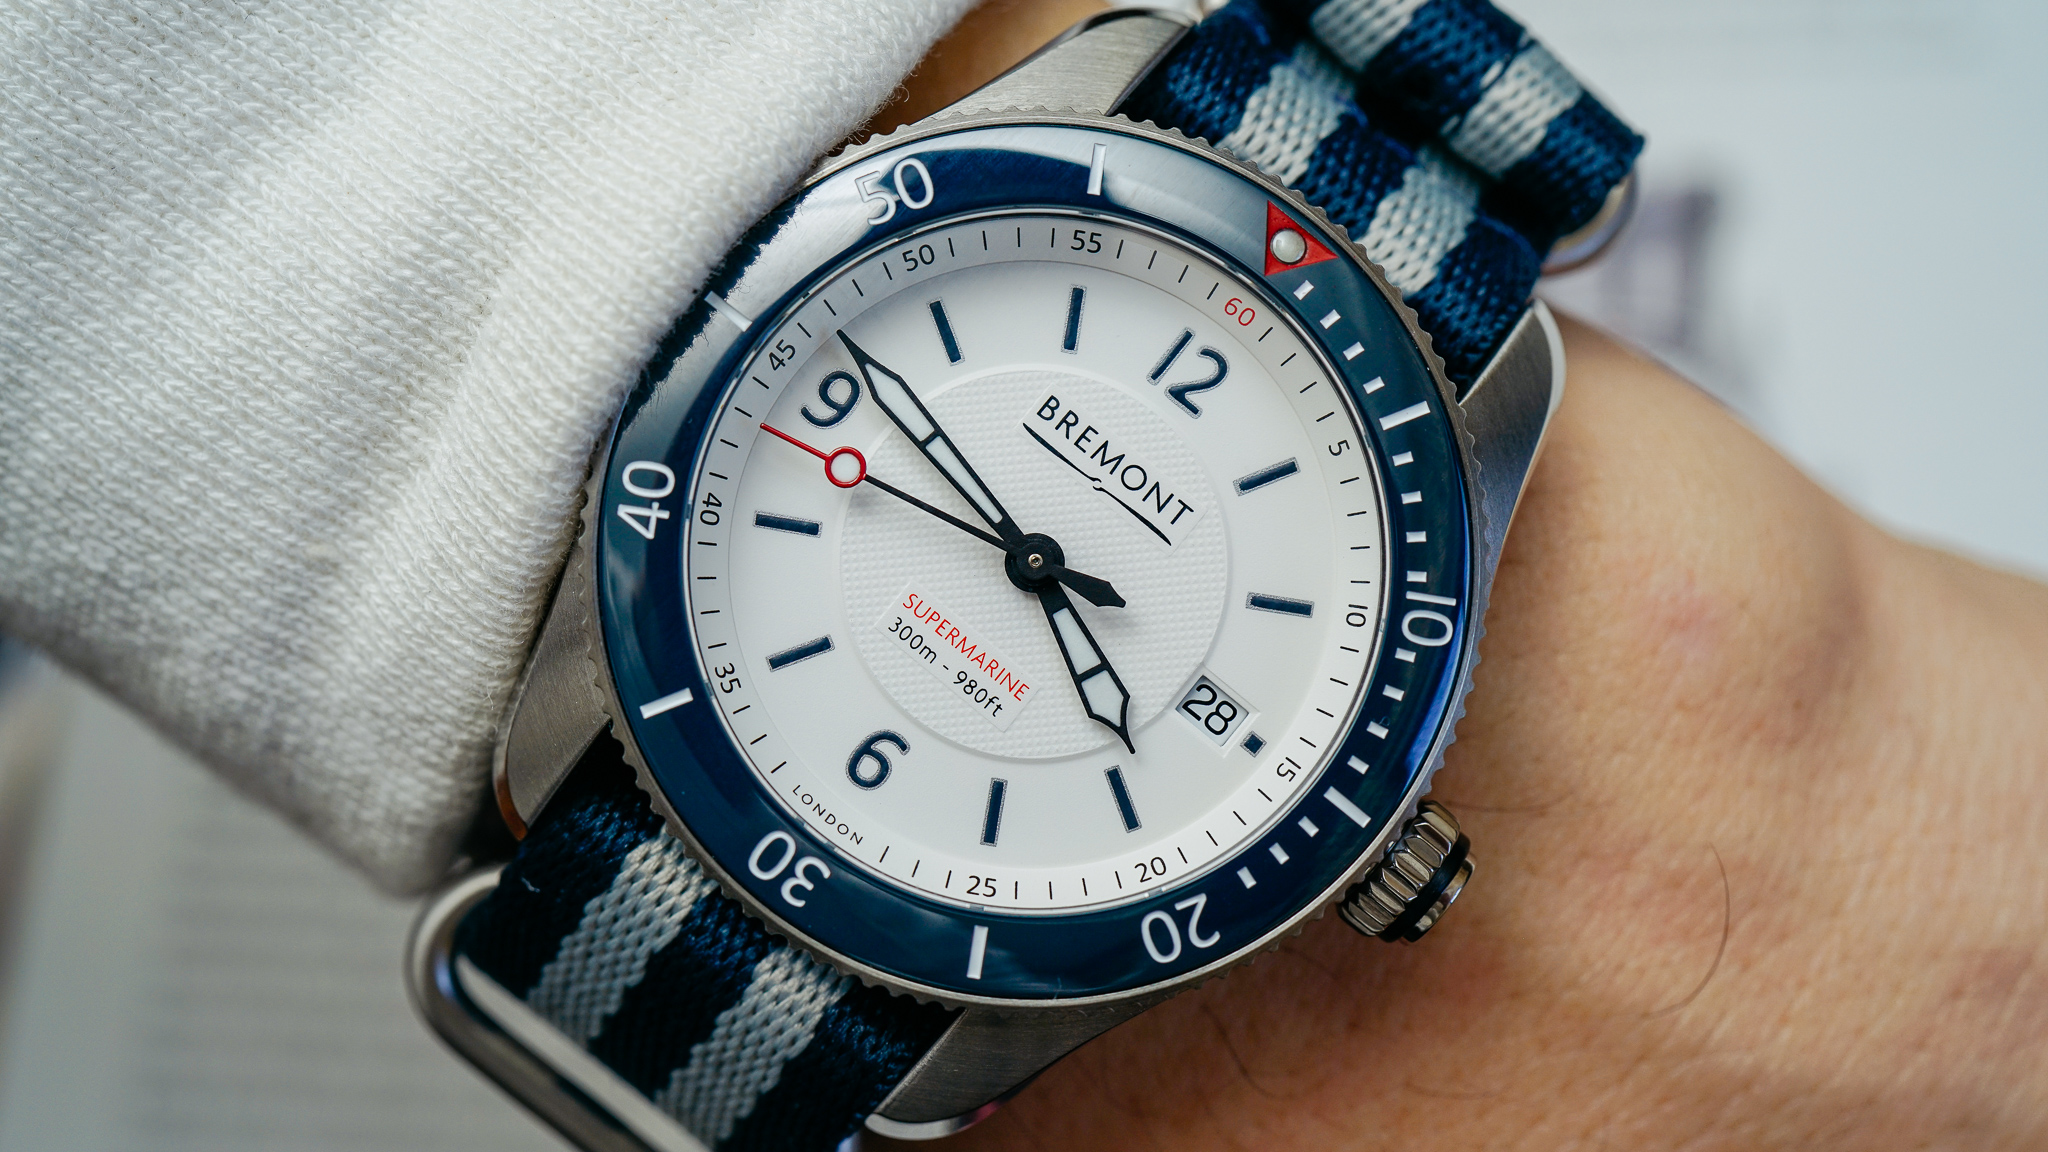 Breaking a Mountaineering World Record with the Bremont Supermarine S300